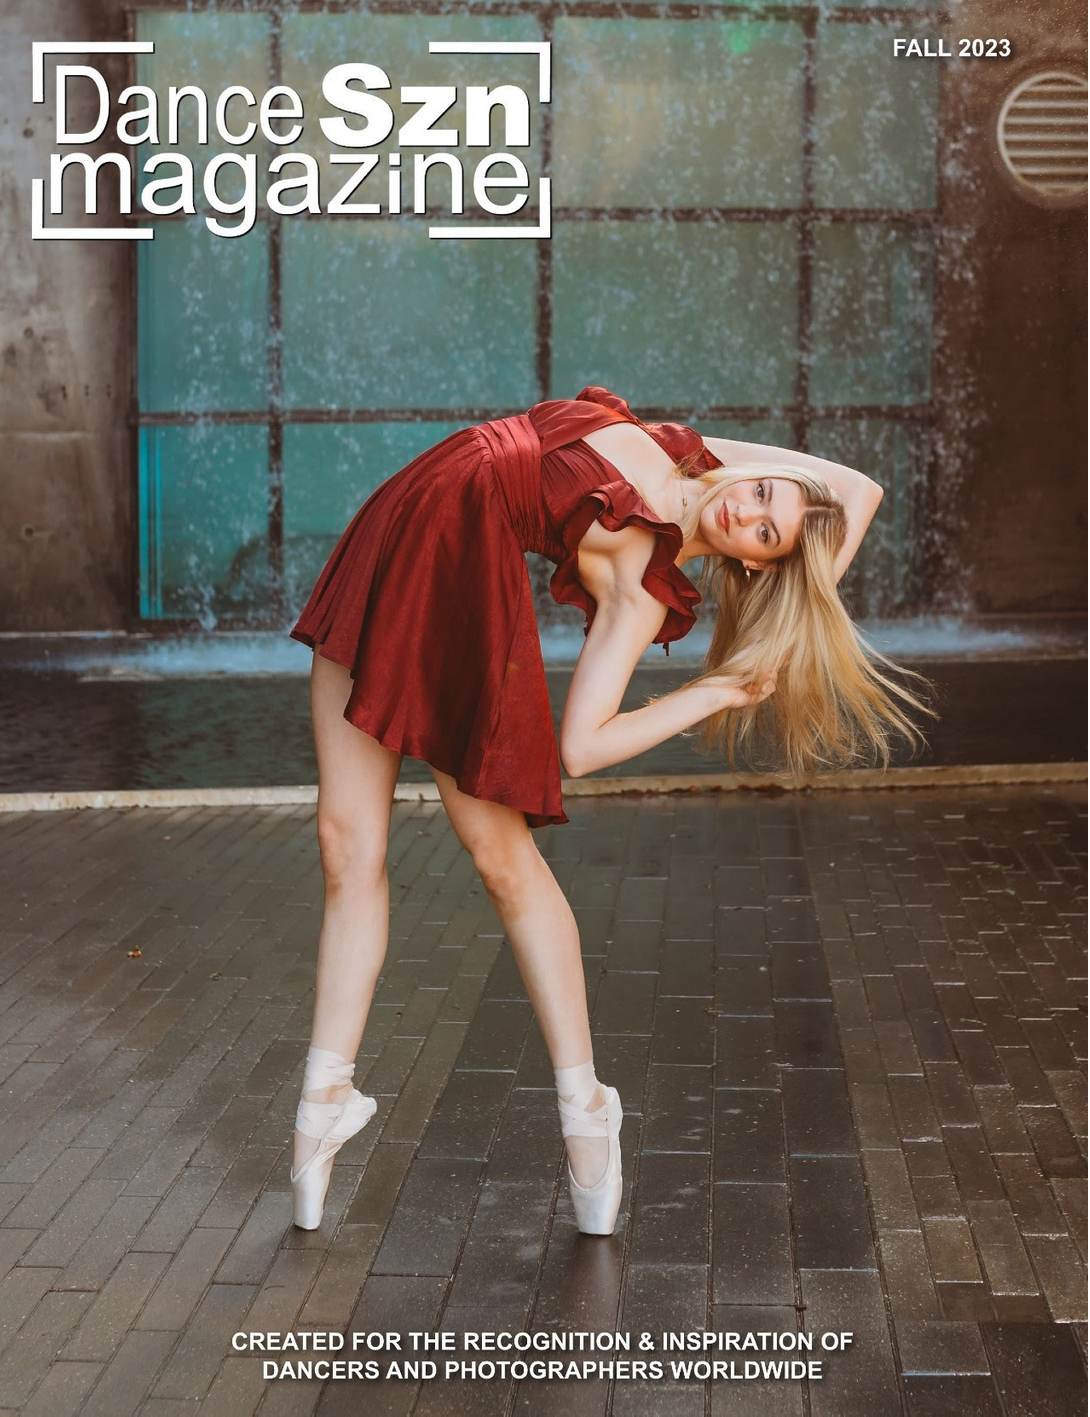 magazine cover with ballet dancer in red dress